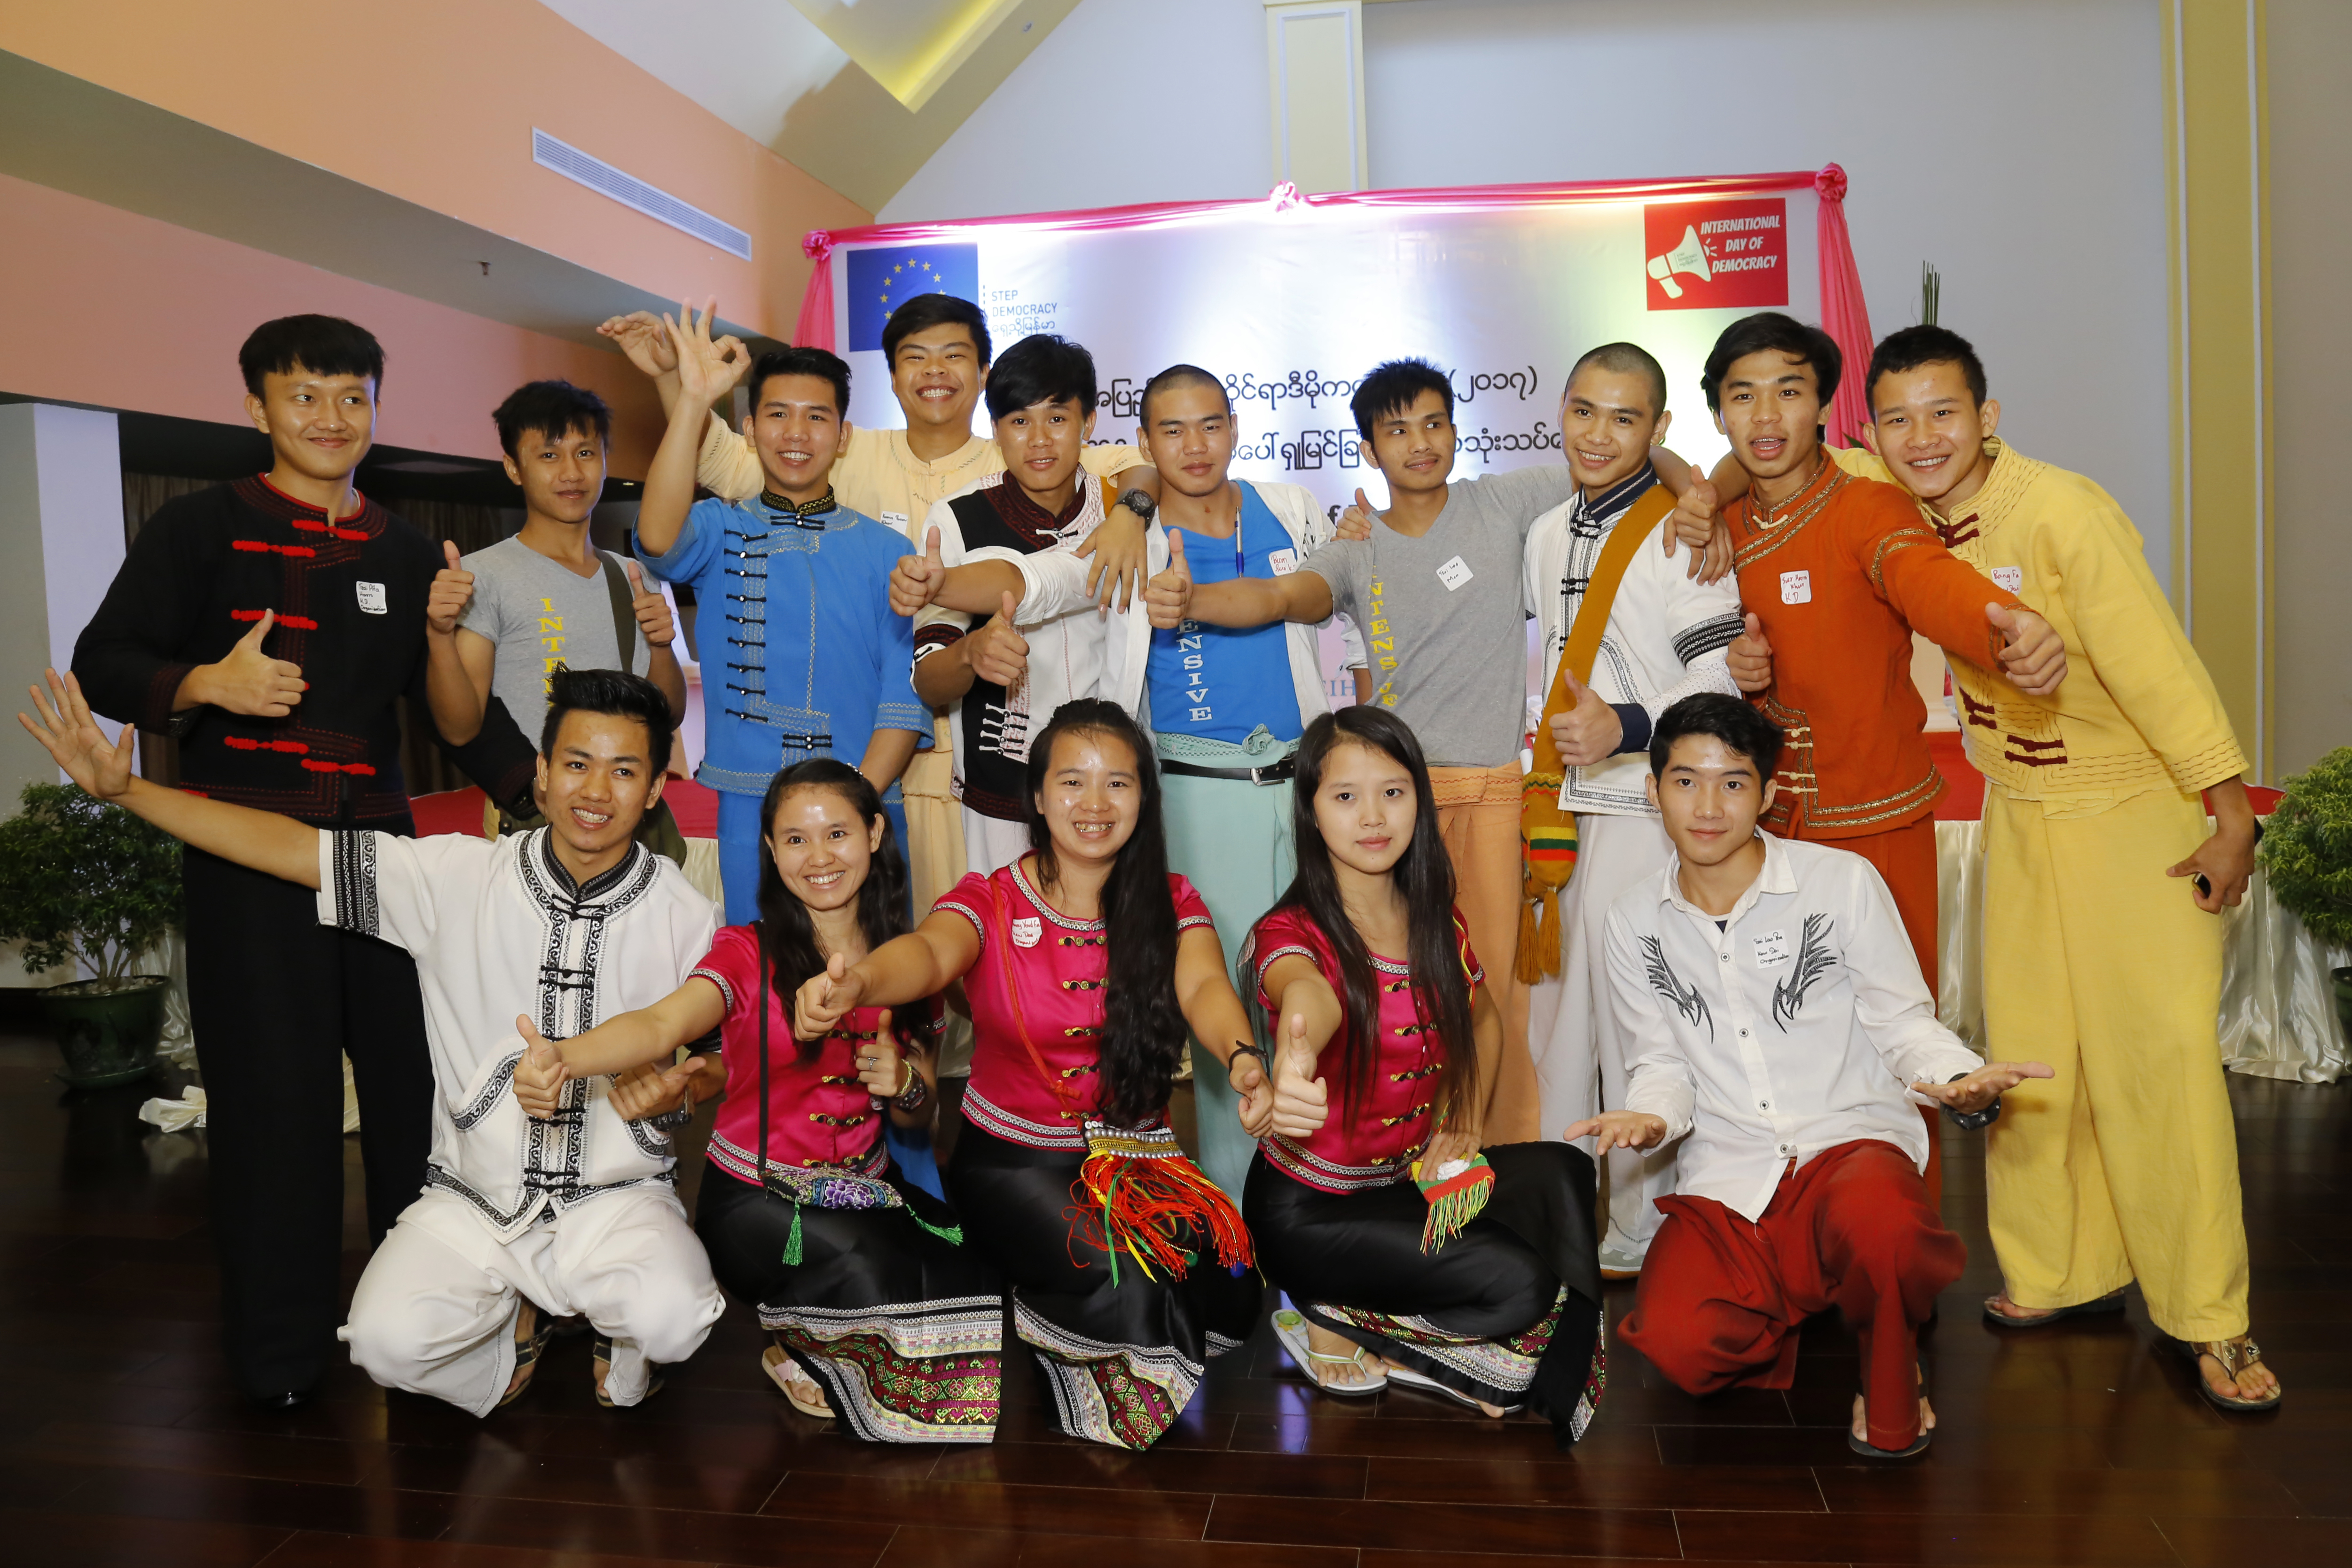 Group photo of youth participants at International IDEA' Myanmar Office International Day of Democracy event